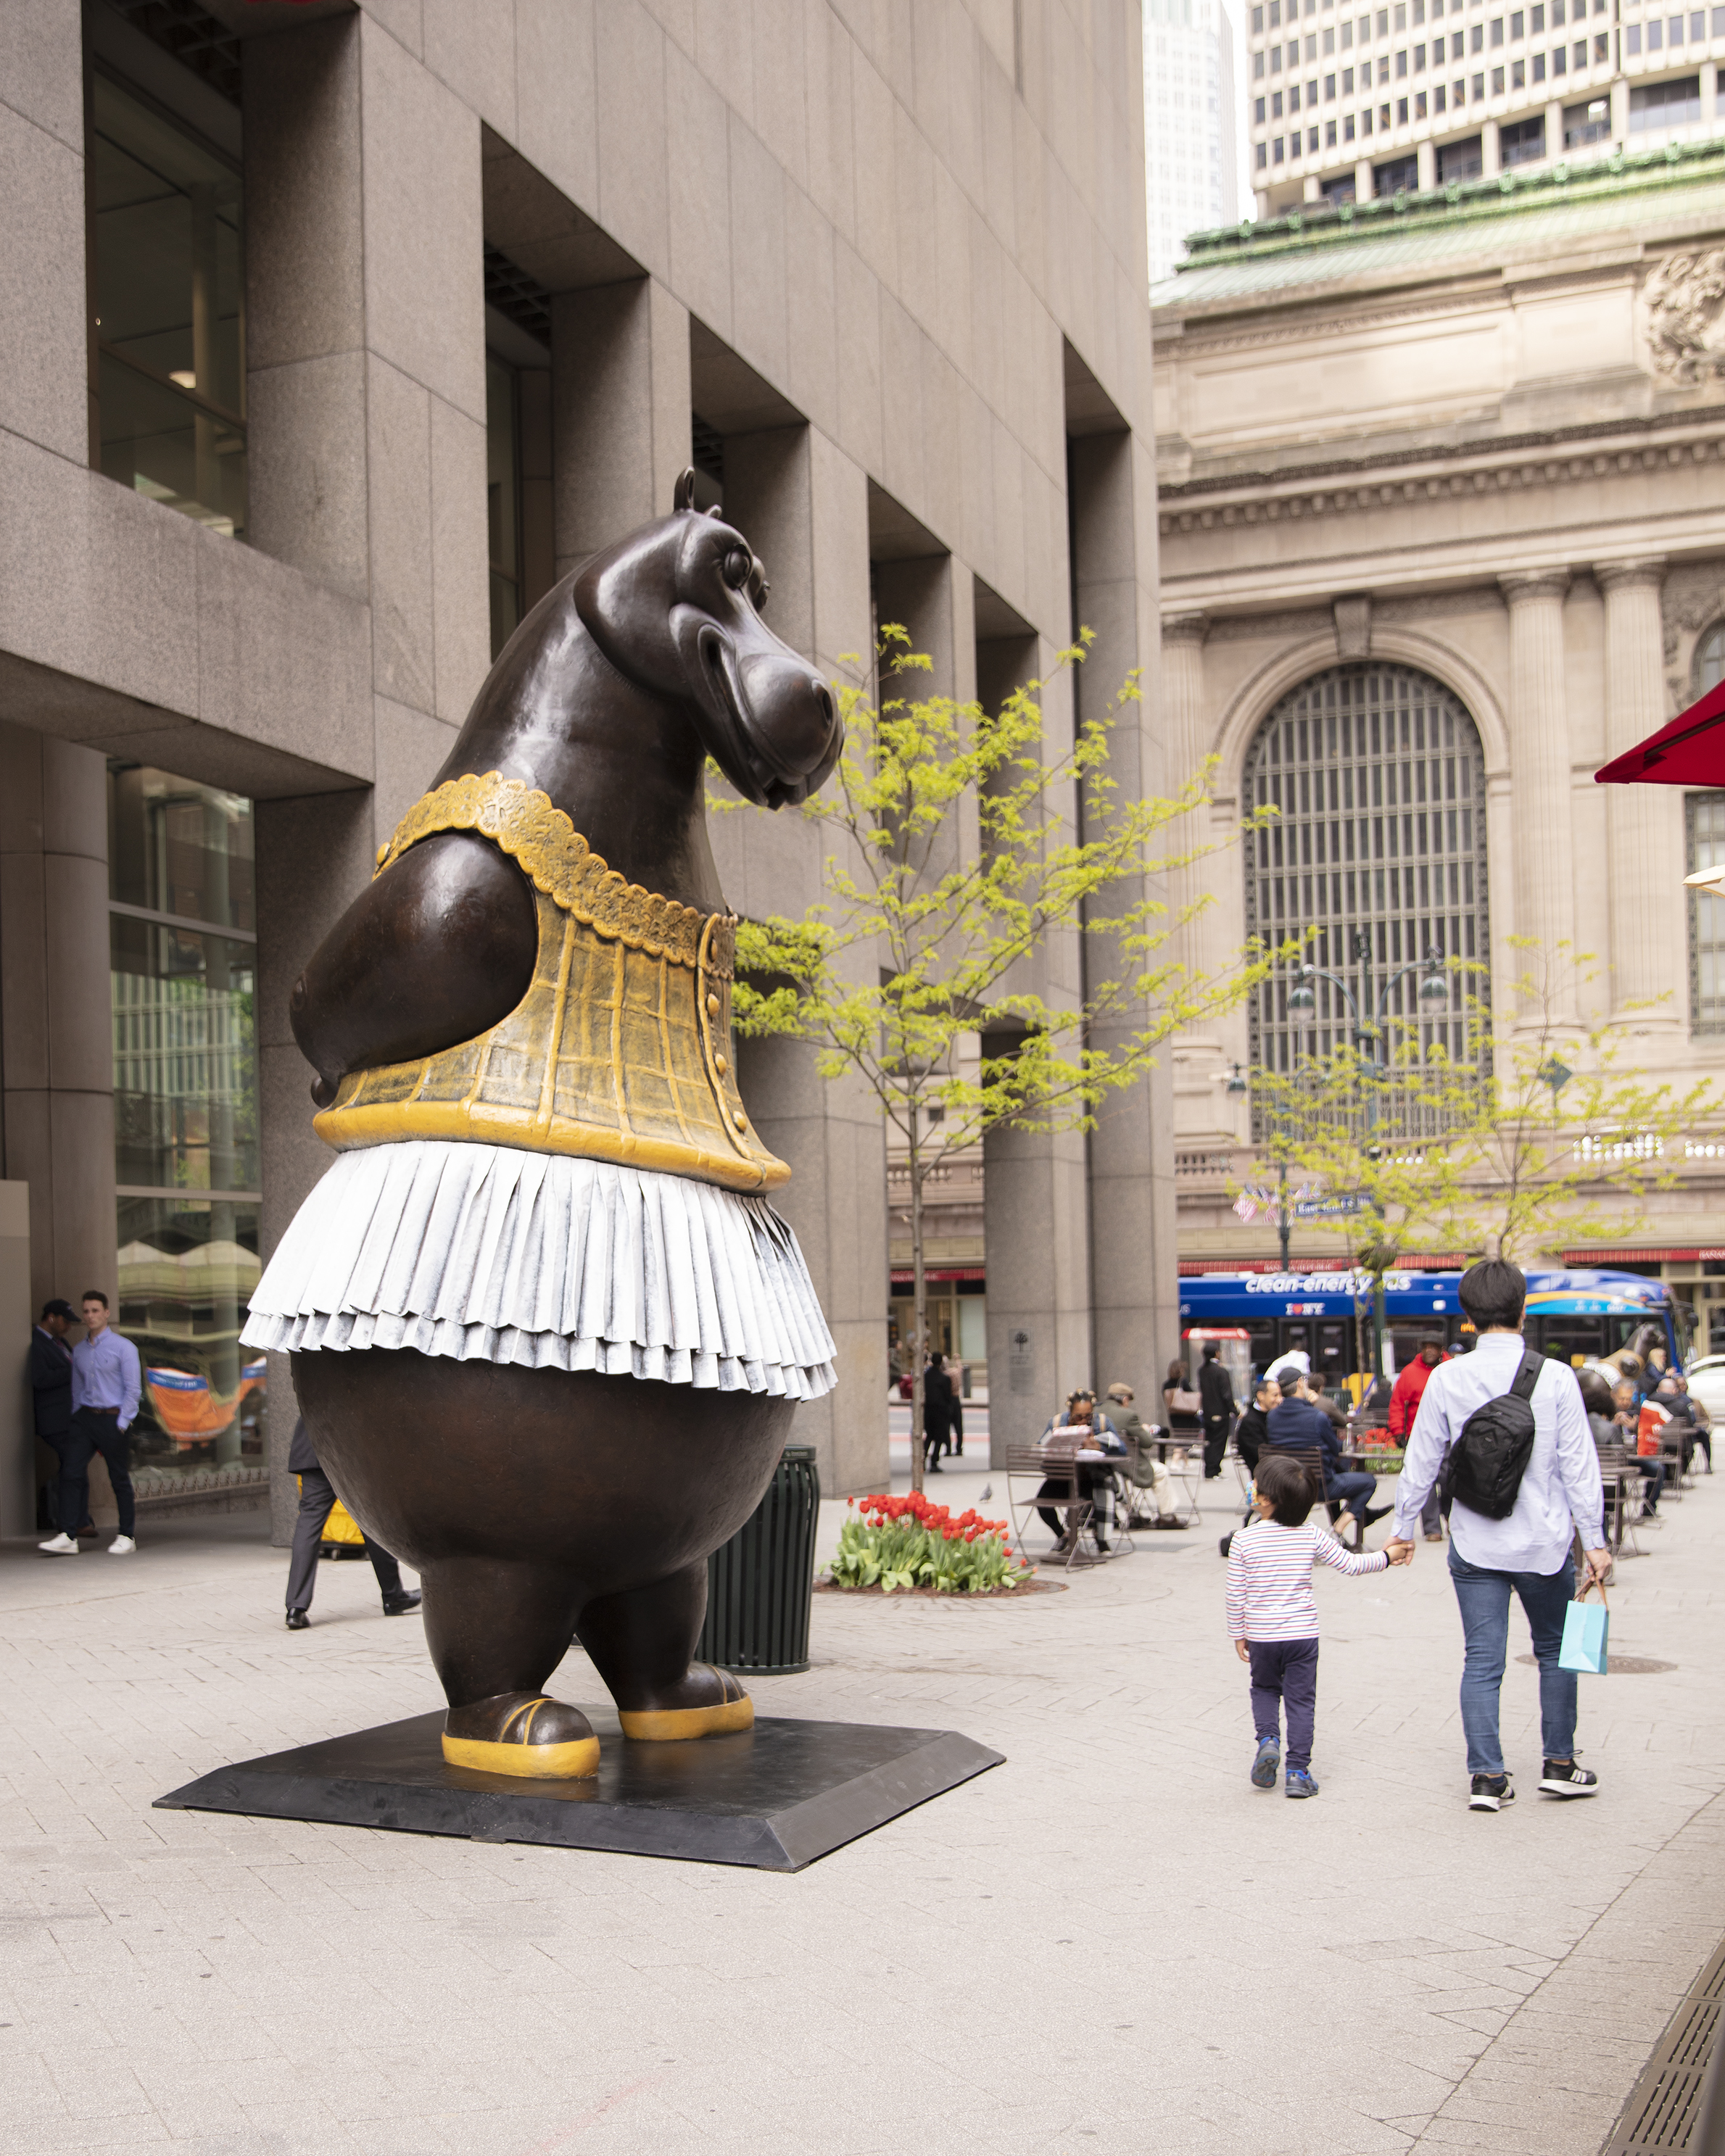 Hippo Ballerina 1 City BIDs Use Arts and Culture to Activate and Revitalize the Streets of New York